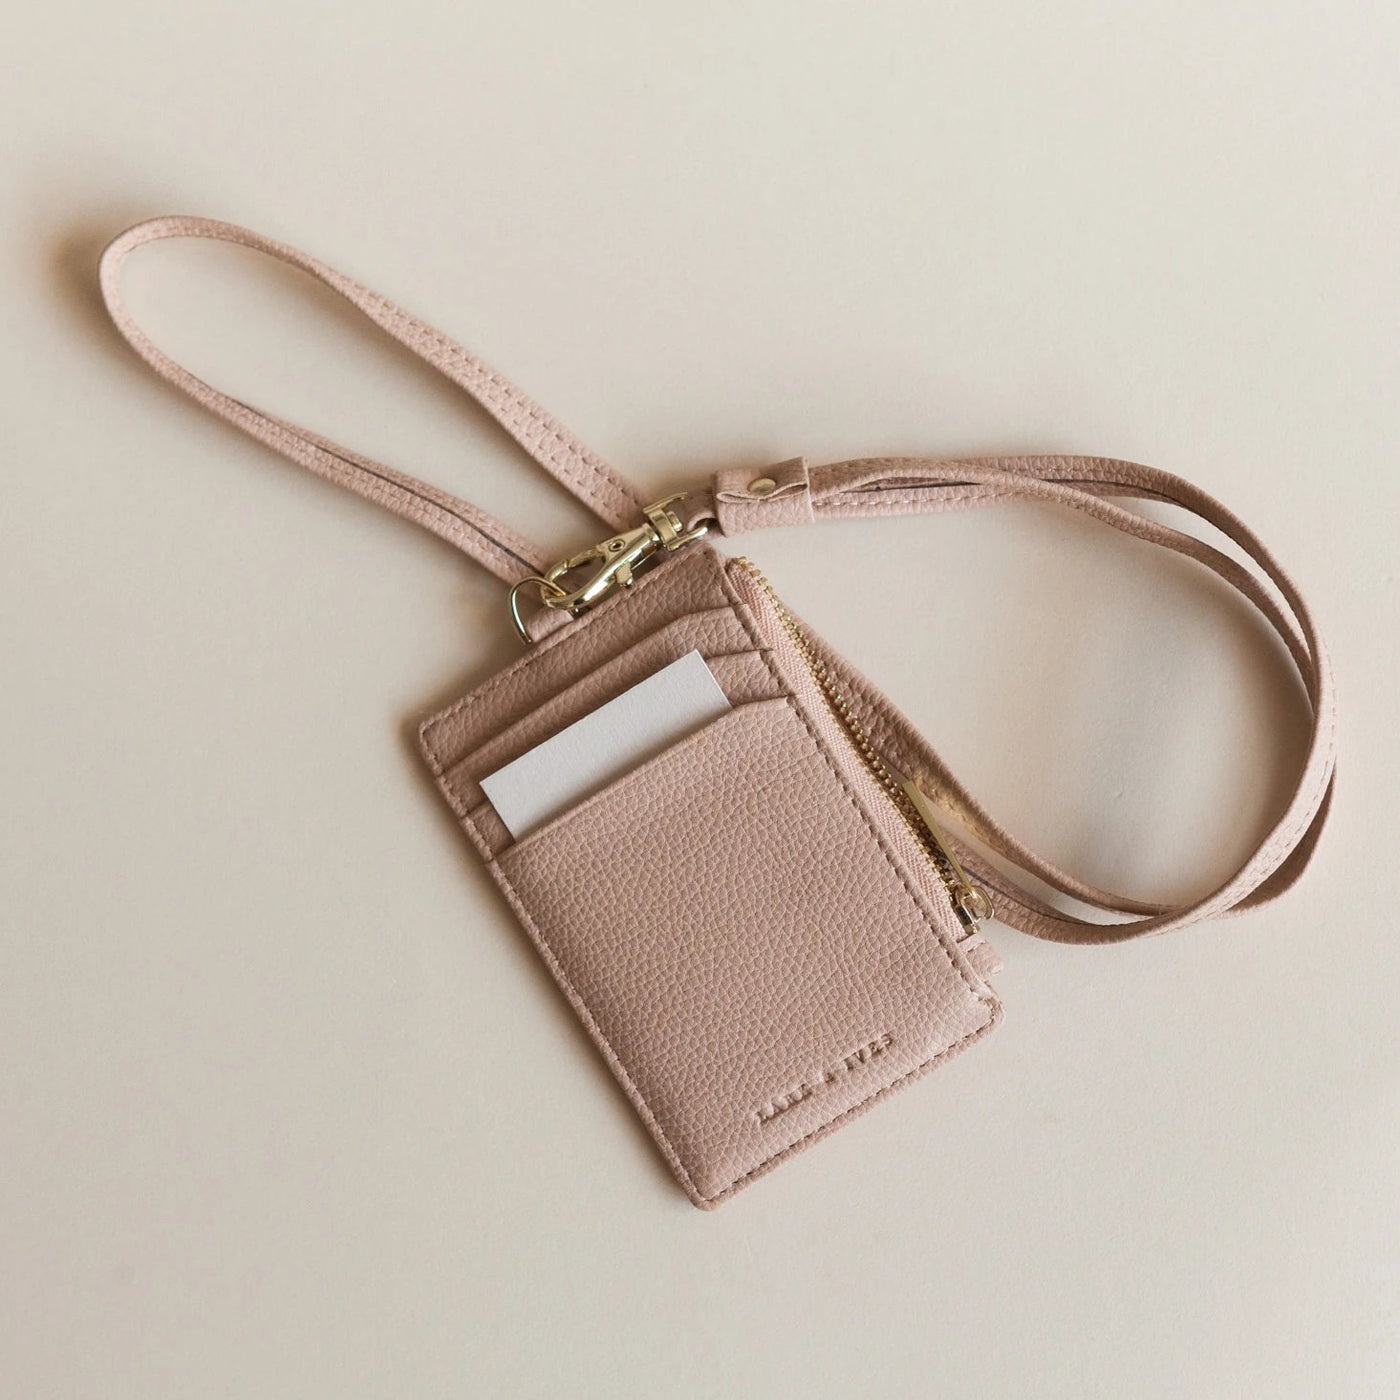 Lark and Ives Nude Lanyard / Card Case with Long Strap and Zippered Compartment / Vegan Leather Accessories / Lanyard / Card Case / Work Badge Case / Lanyard